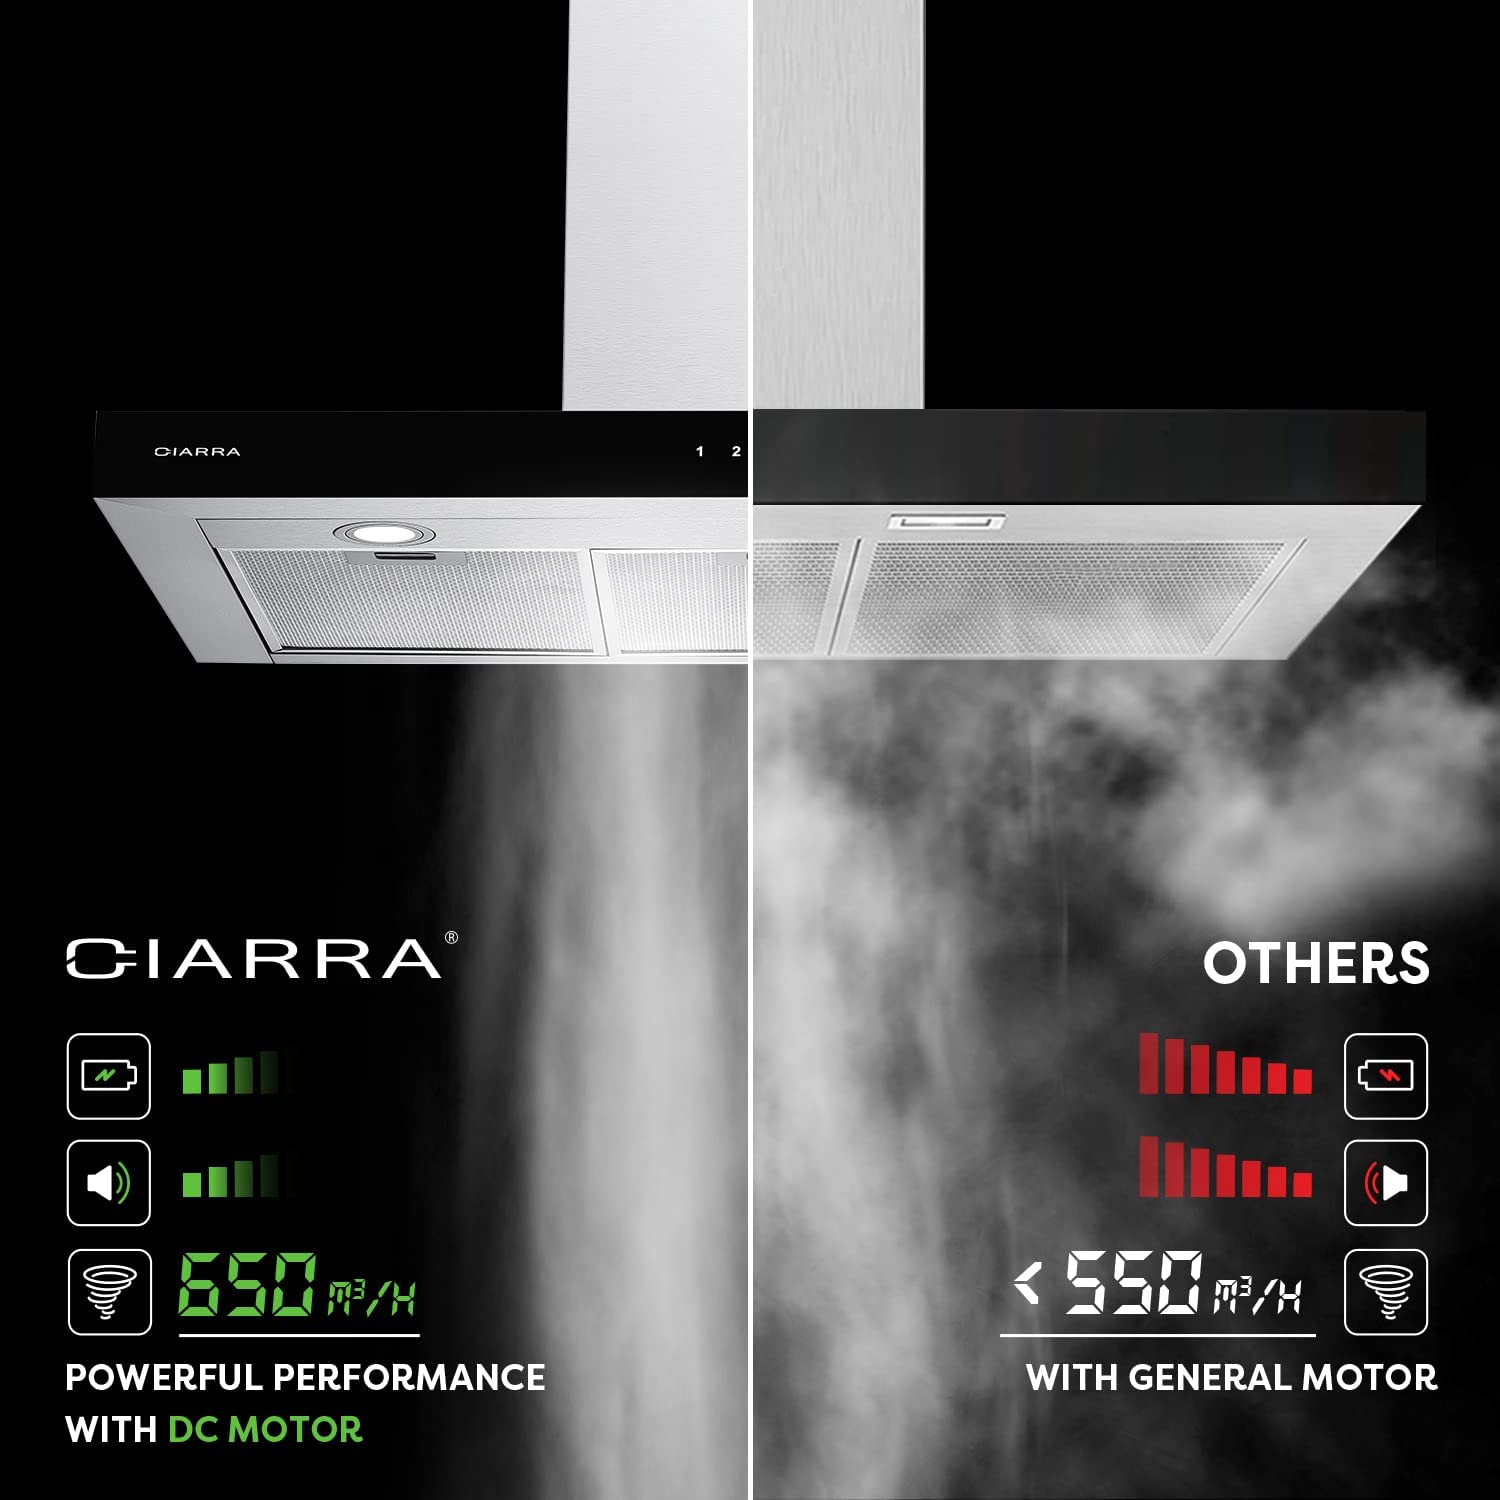 CIARRA CBCS9102 Class A++ Touch Control Chimney Wall Mount Stainless Steel Cooker Hood Extractor Fan